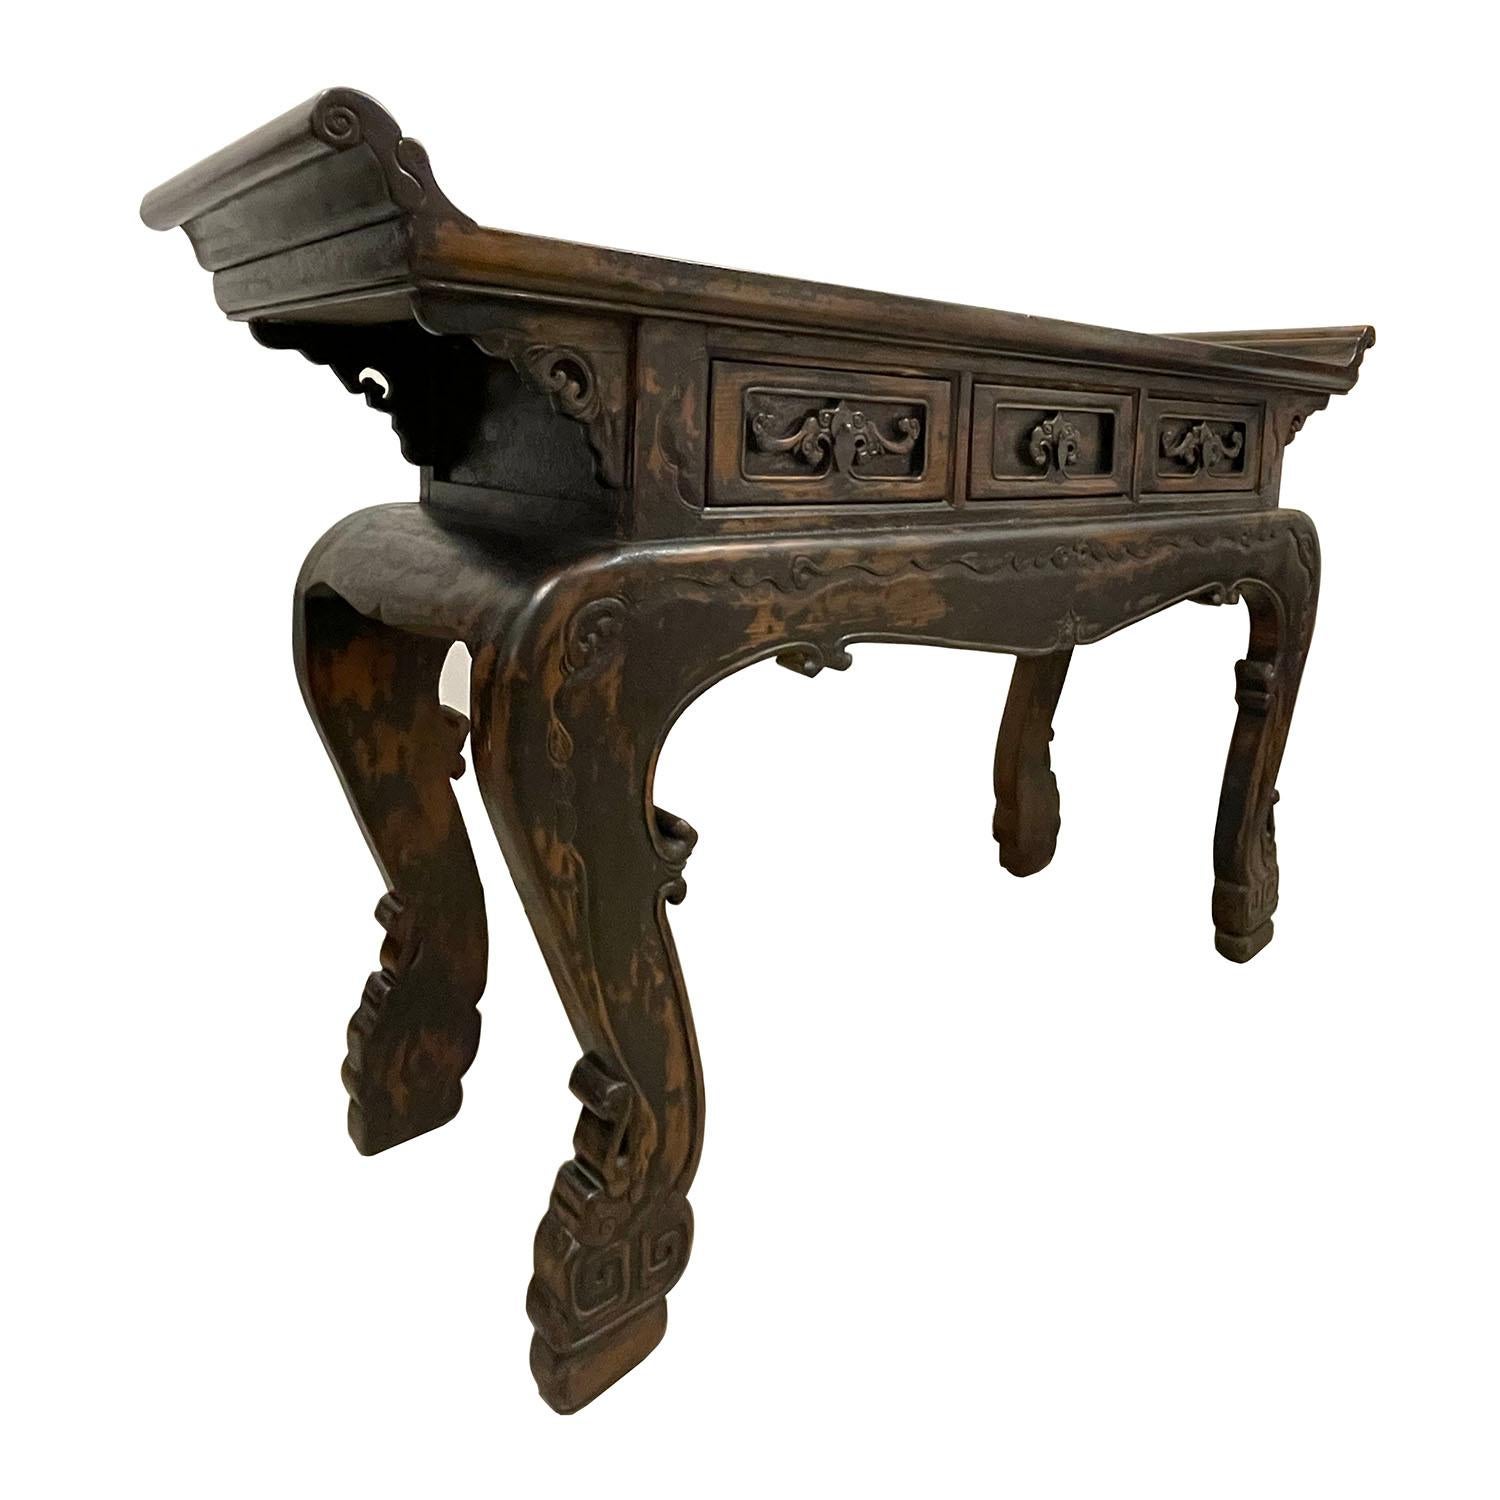 Size: 37 1/2in H x 68in W x 18in D?
Drawer: 4in H x 11in W x 12in D
Origin: China
Circa: 1850 - 1870
Material: Wood
Condition: Solid wood construction, heavy and sturdy, deep carved spandrels. normal age wear.

Description: Very well